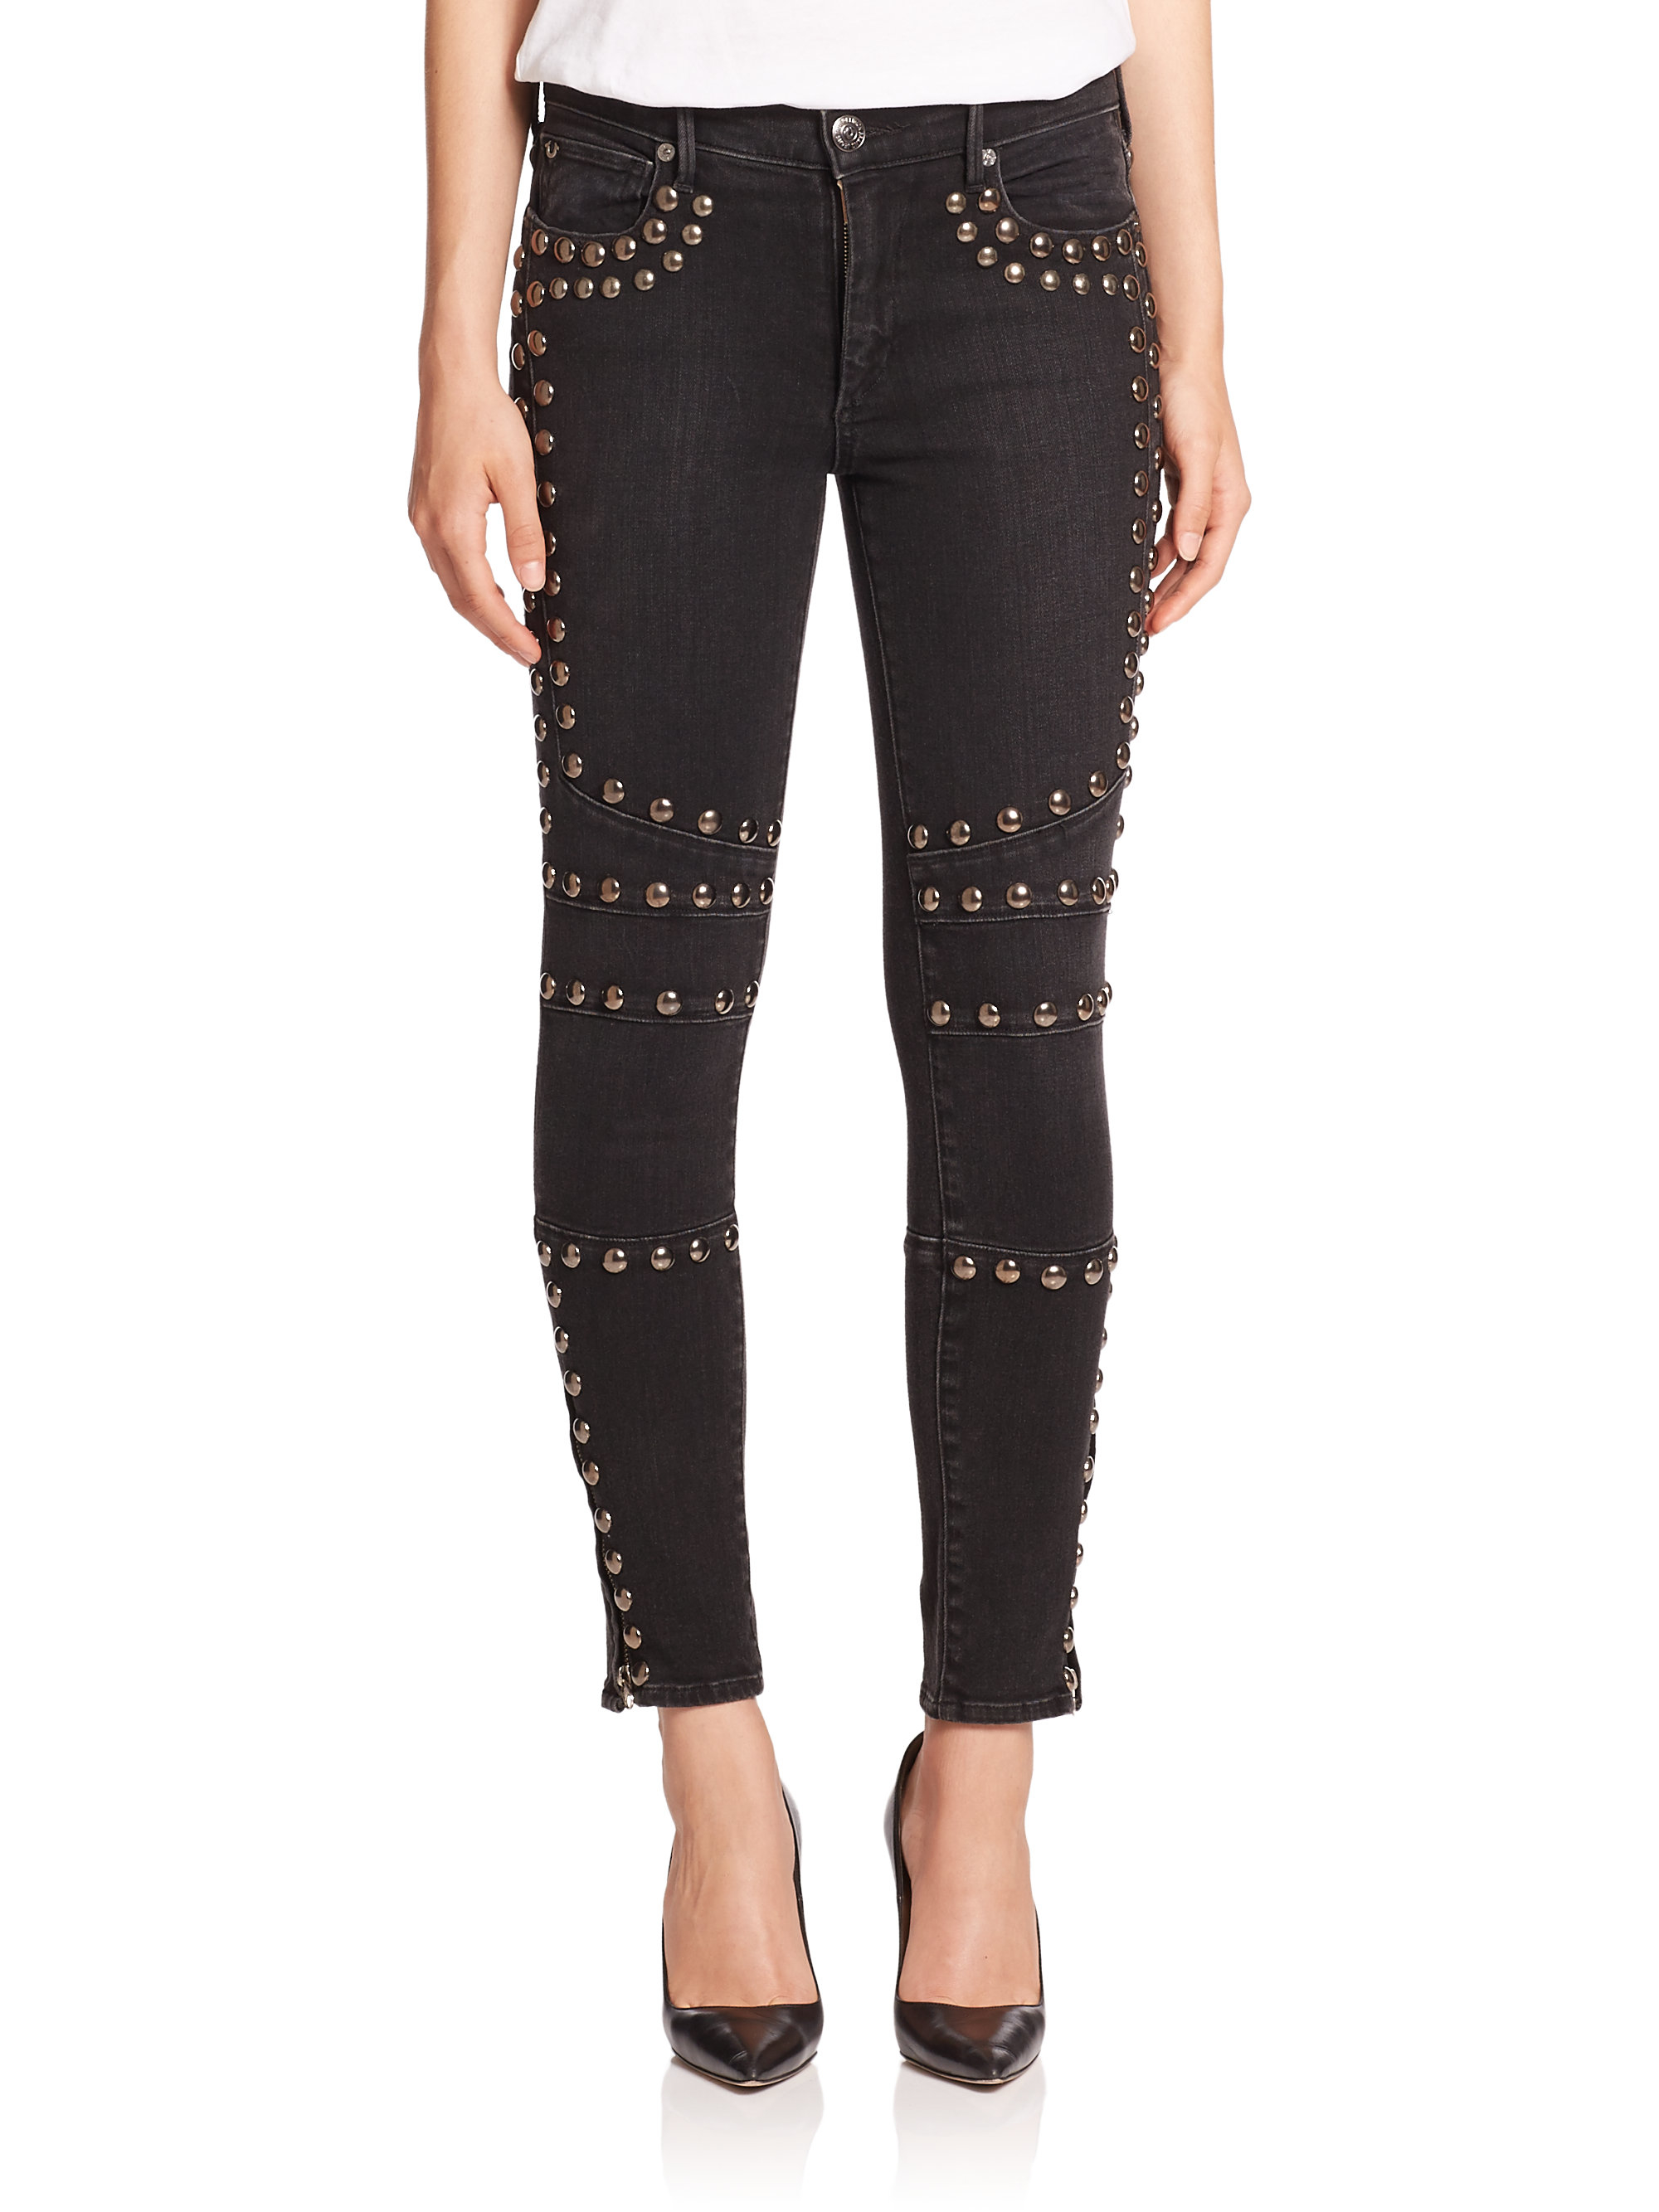 Lyst - True Religion Studded Mid-rise Super Skinny Jeans in Black